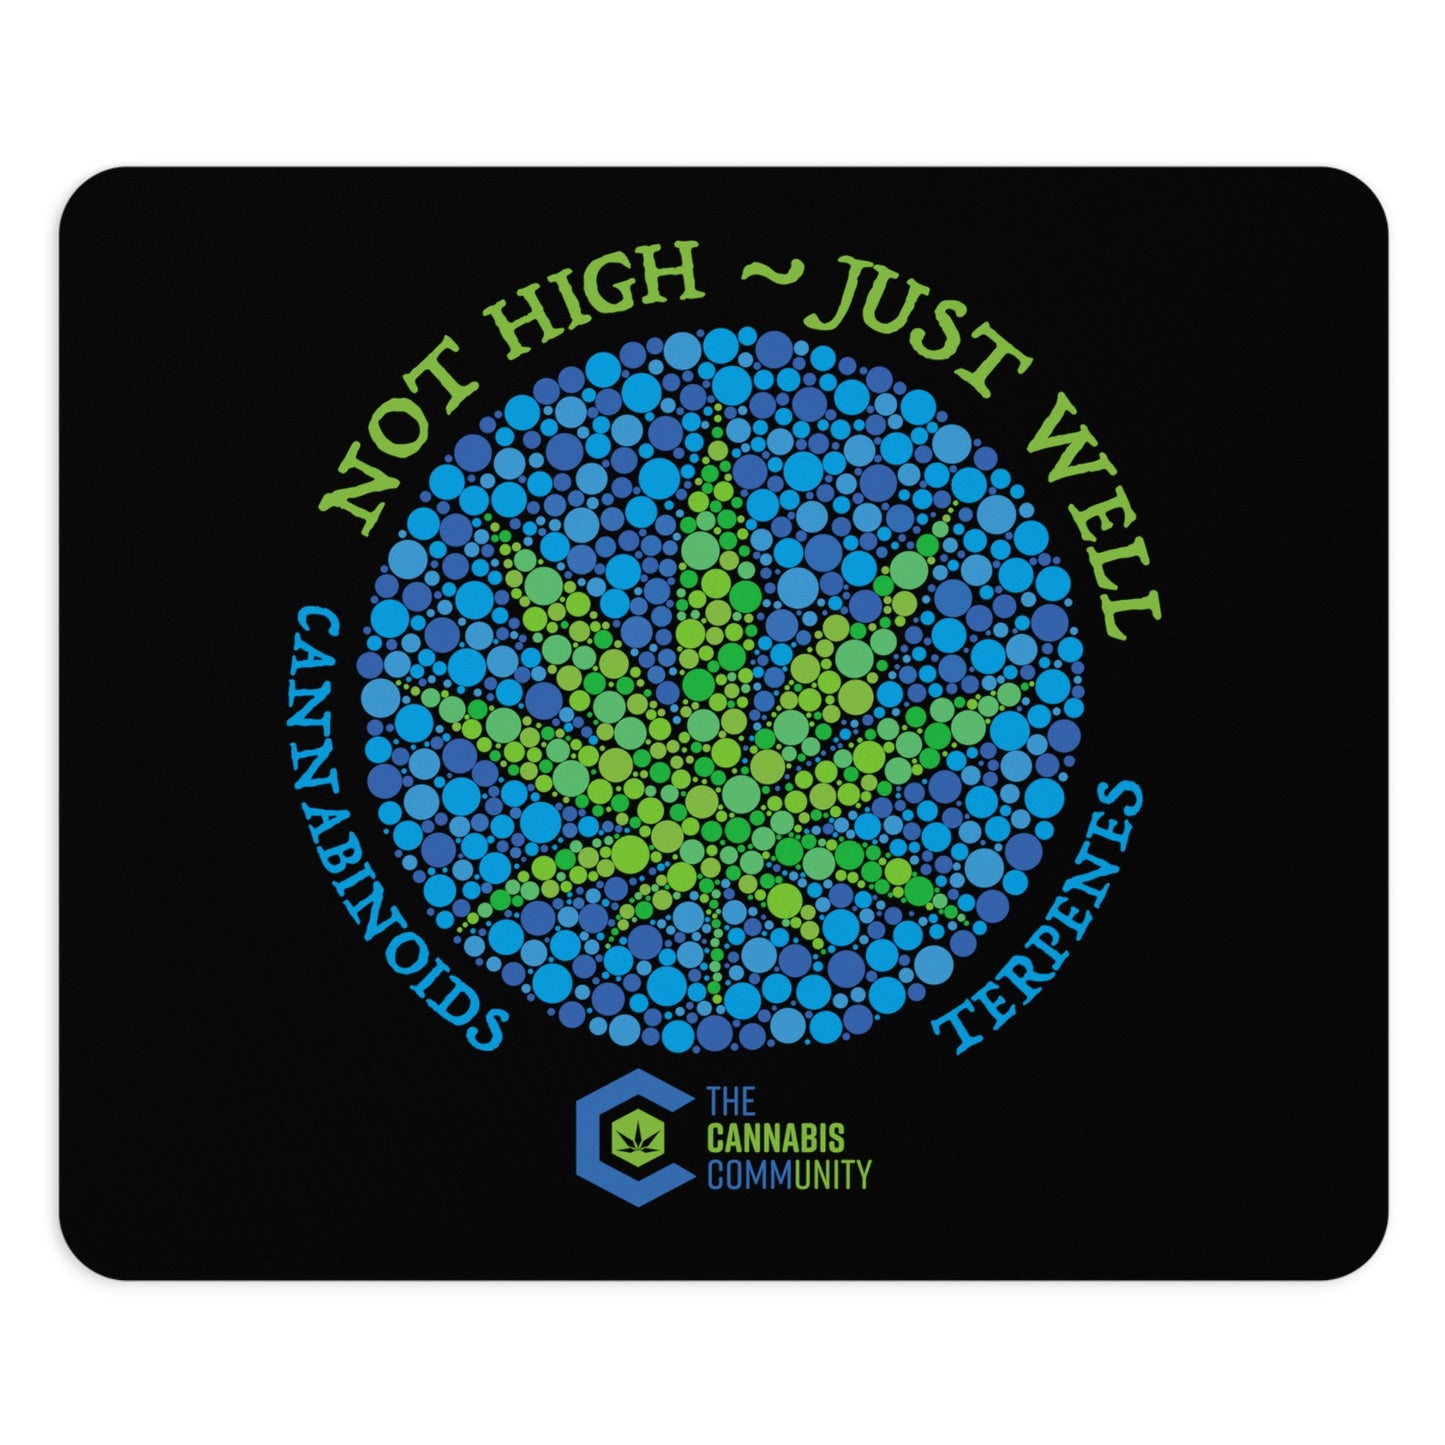 This Not High, Just Well Mouse Pad is creatively designed to appeal to the user with green weed leaf in the center.